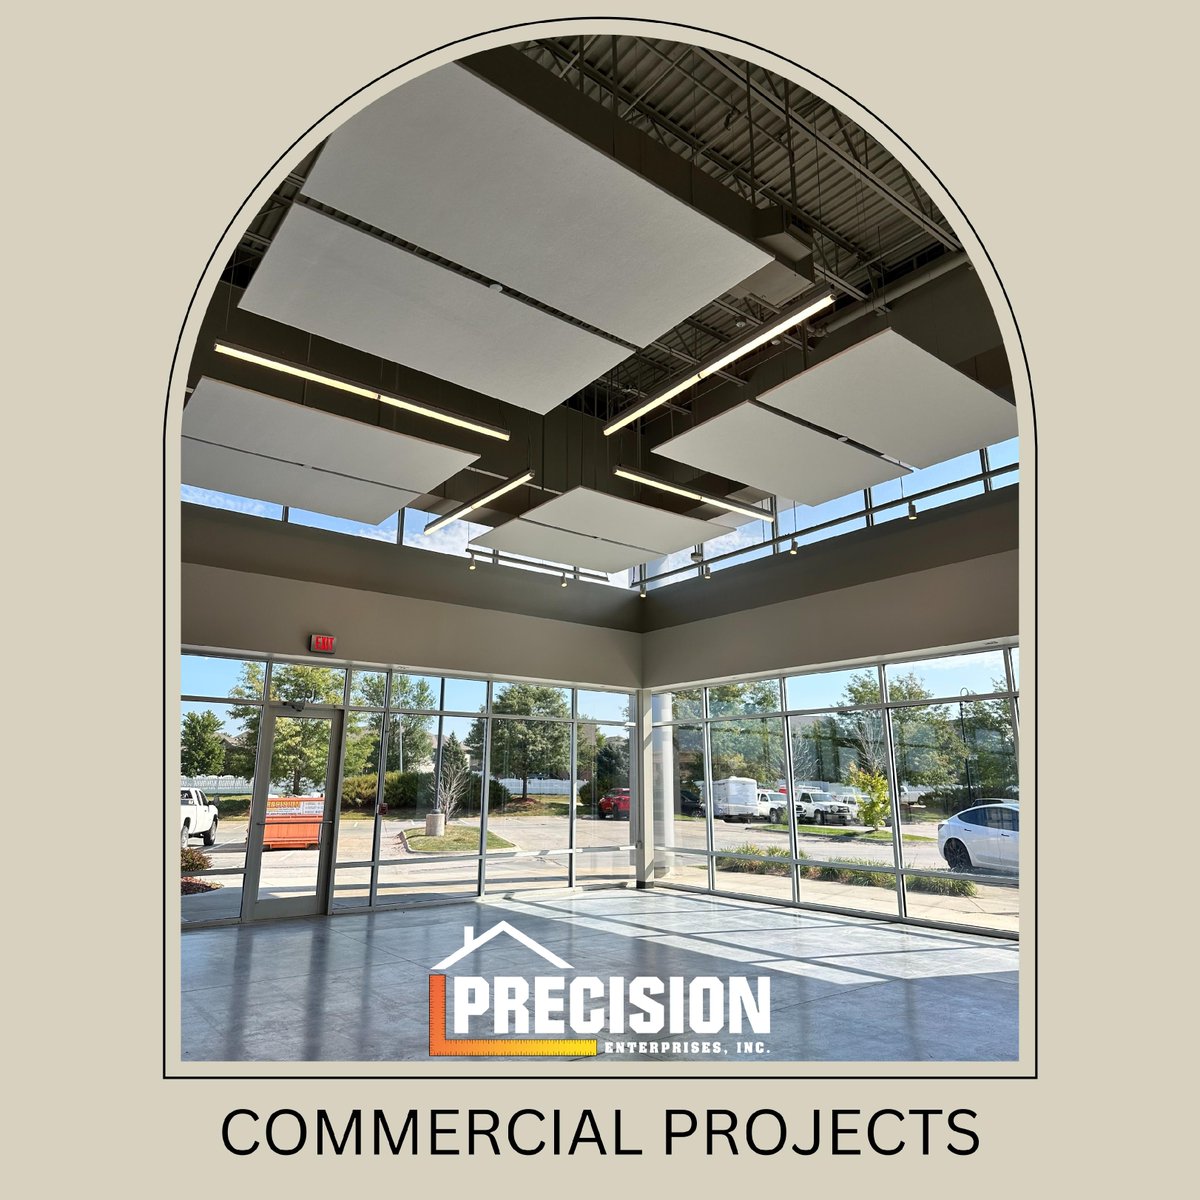 We're your partner for top-quality commercial construction projects. Experience excellence from start to finish with our meticulous attention to detail and commitment to superior craftsmanship.

precisionenterprise.com

#commercialprojects #commercialconstruction #construction